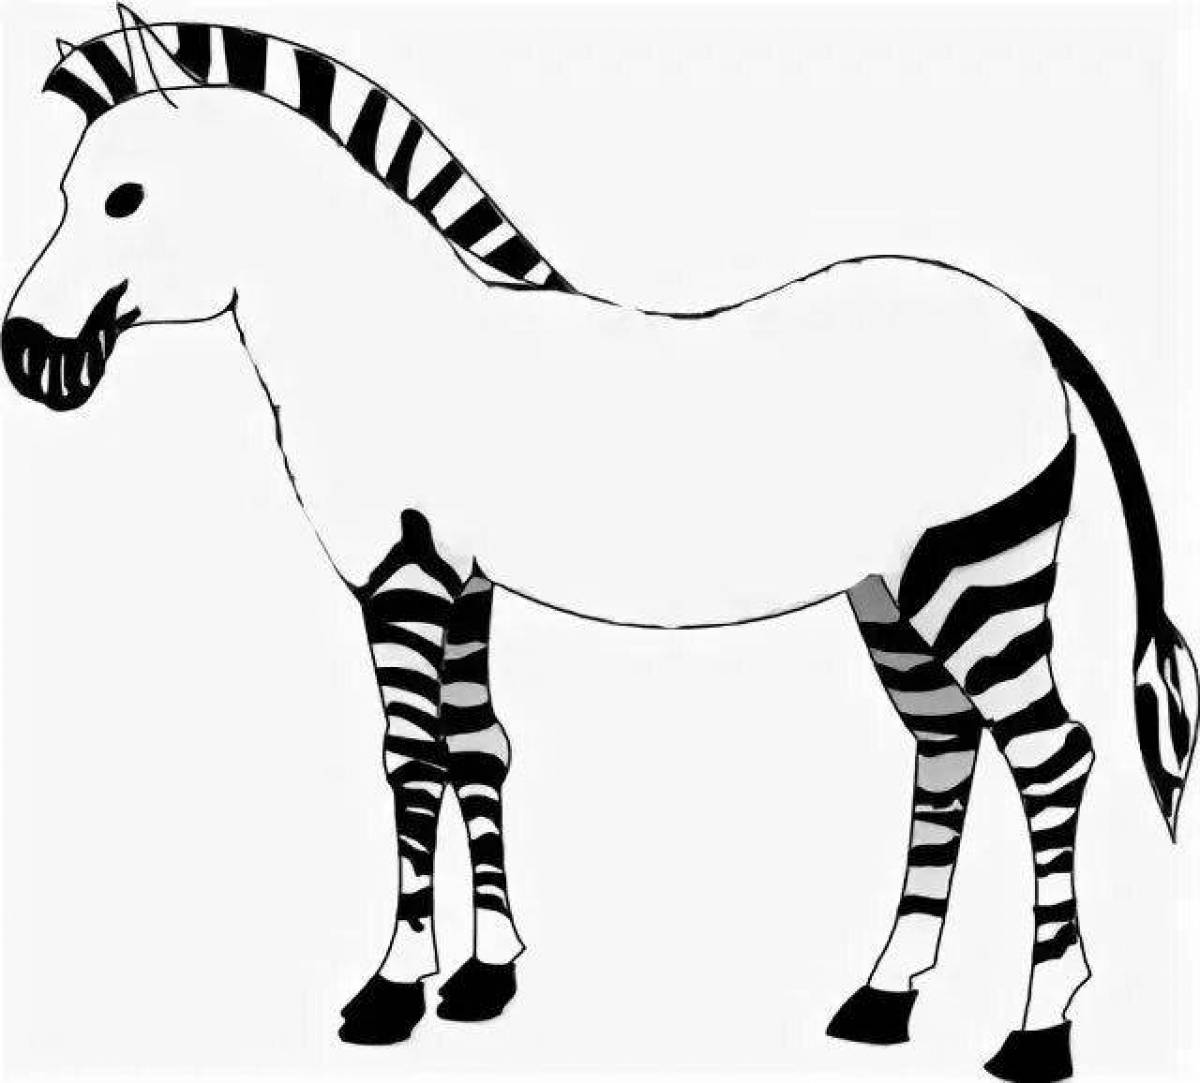 Attractive zebra without stripes for children